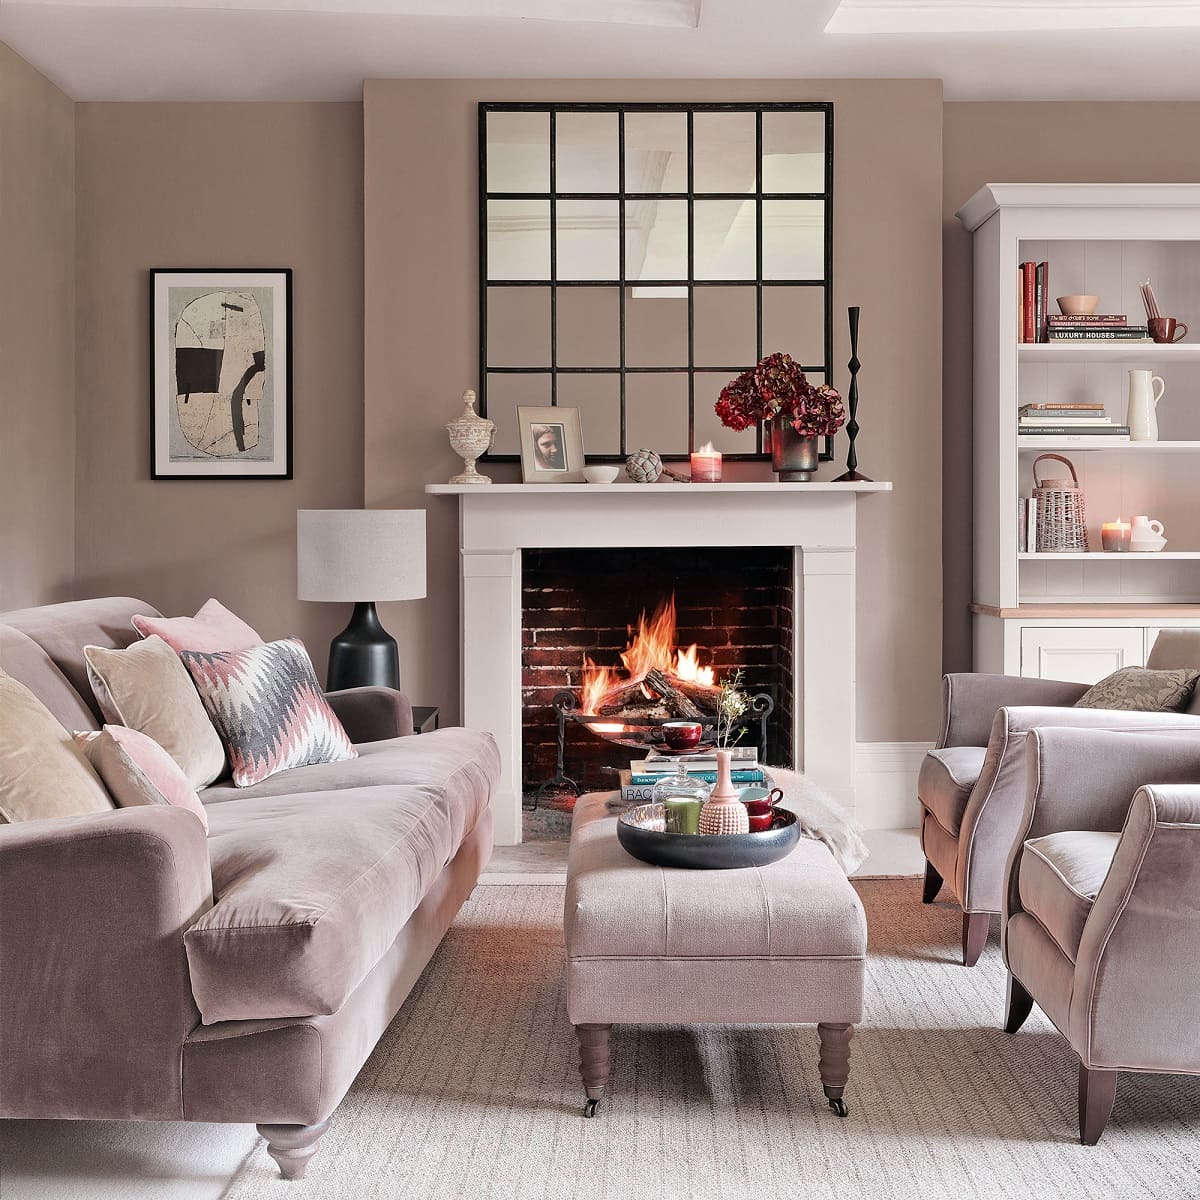 What Colors Make A Living Room Cozy? Design Experts Advise